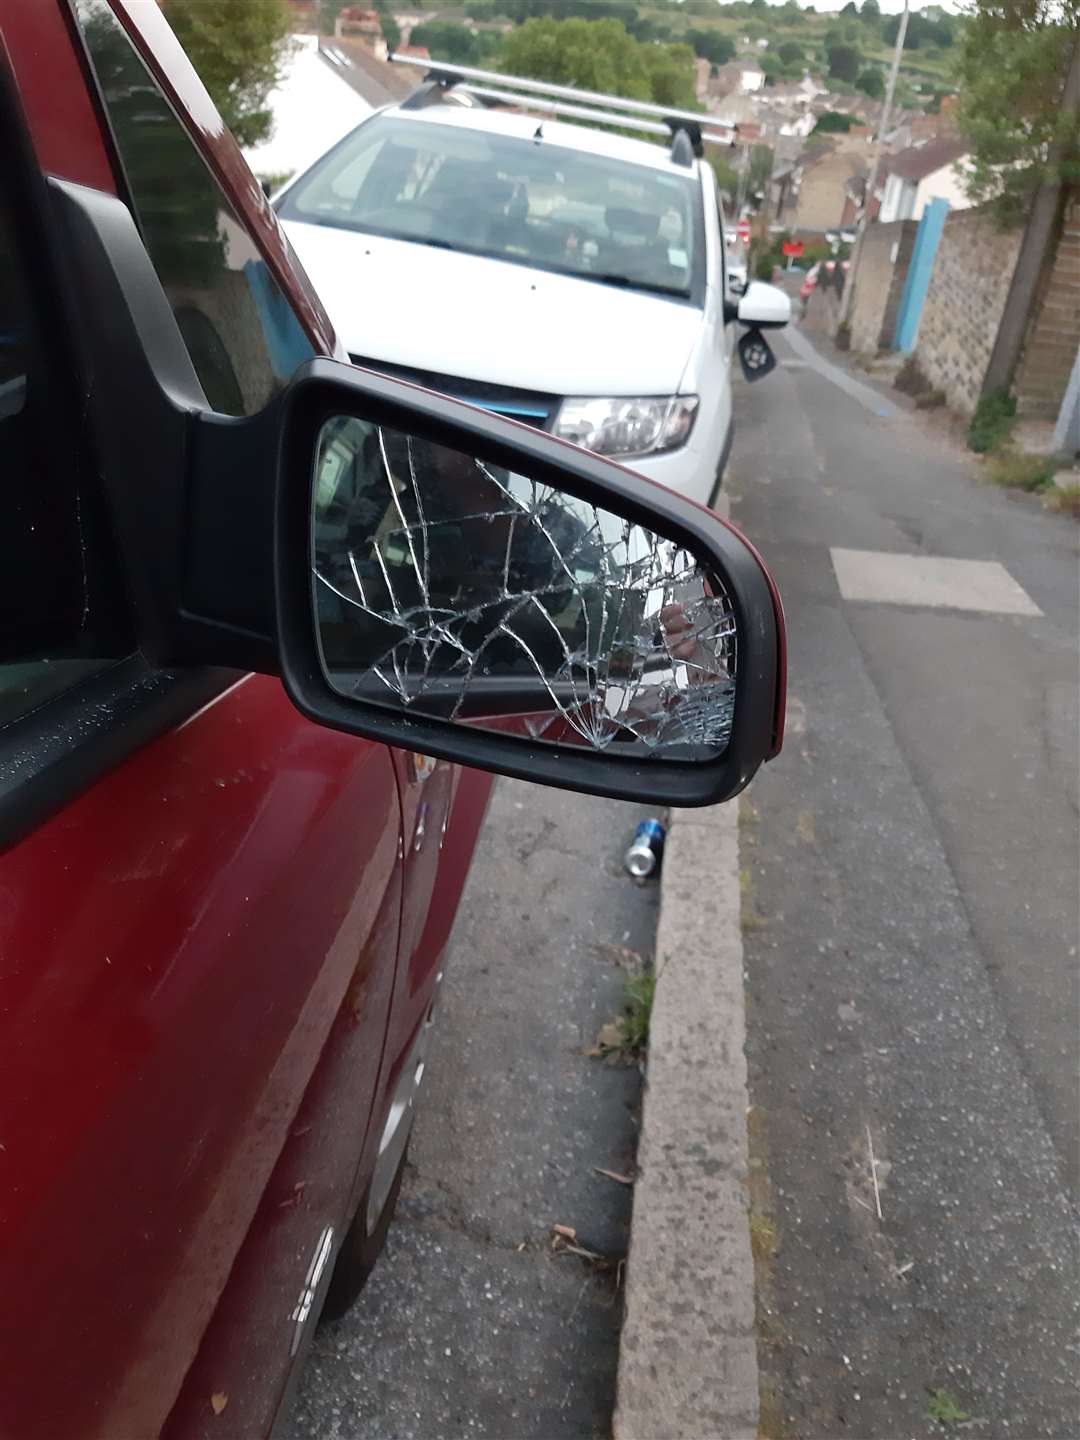 One of the vandalised cars at Minerva Avenue, Dover Picture: Angela Hoskins